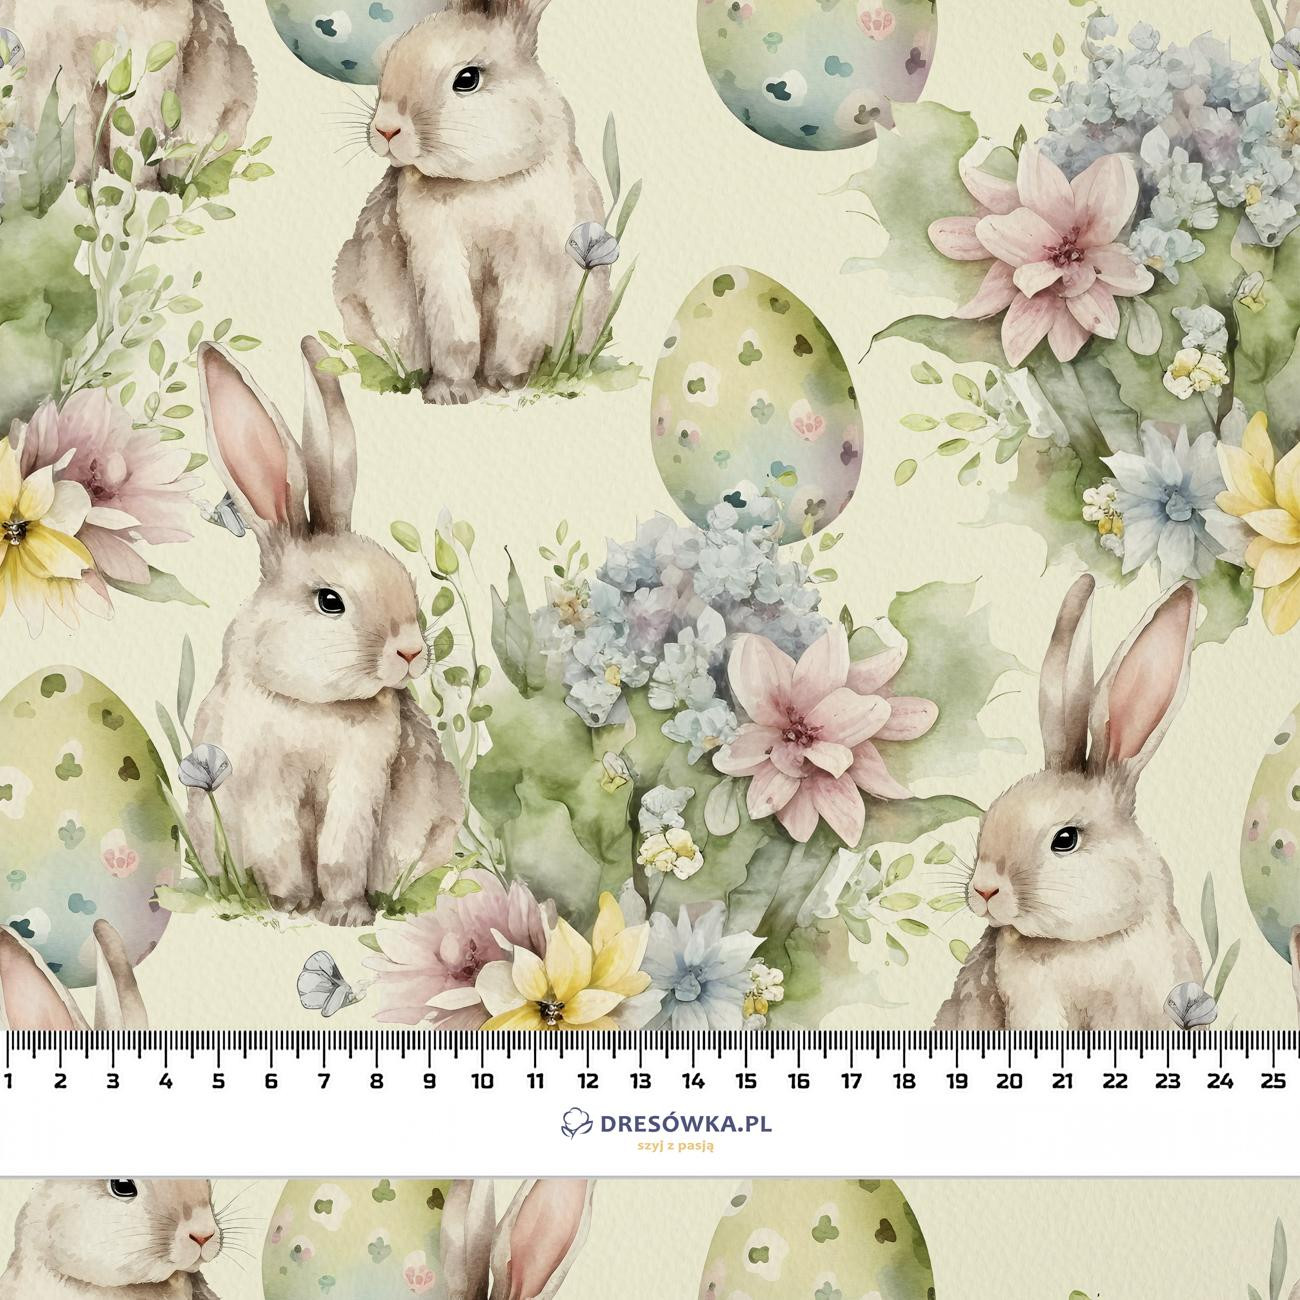 BUNNY EASTER PAT. 1 - Cotton woven fabric